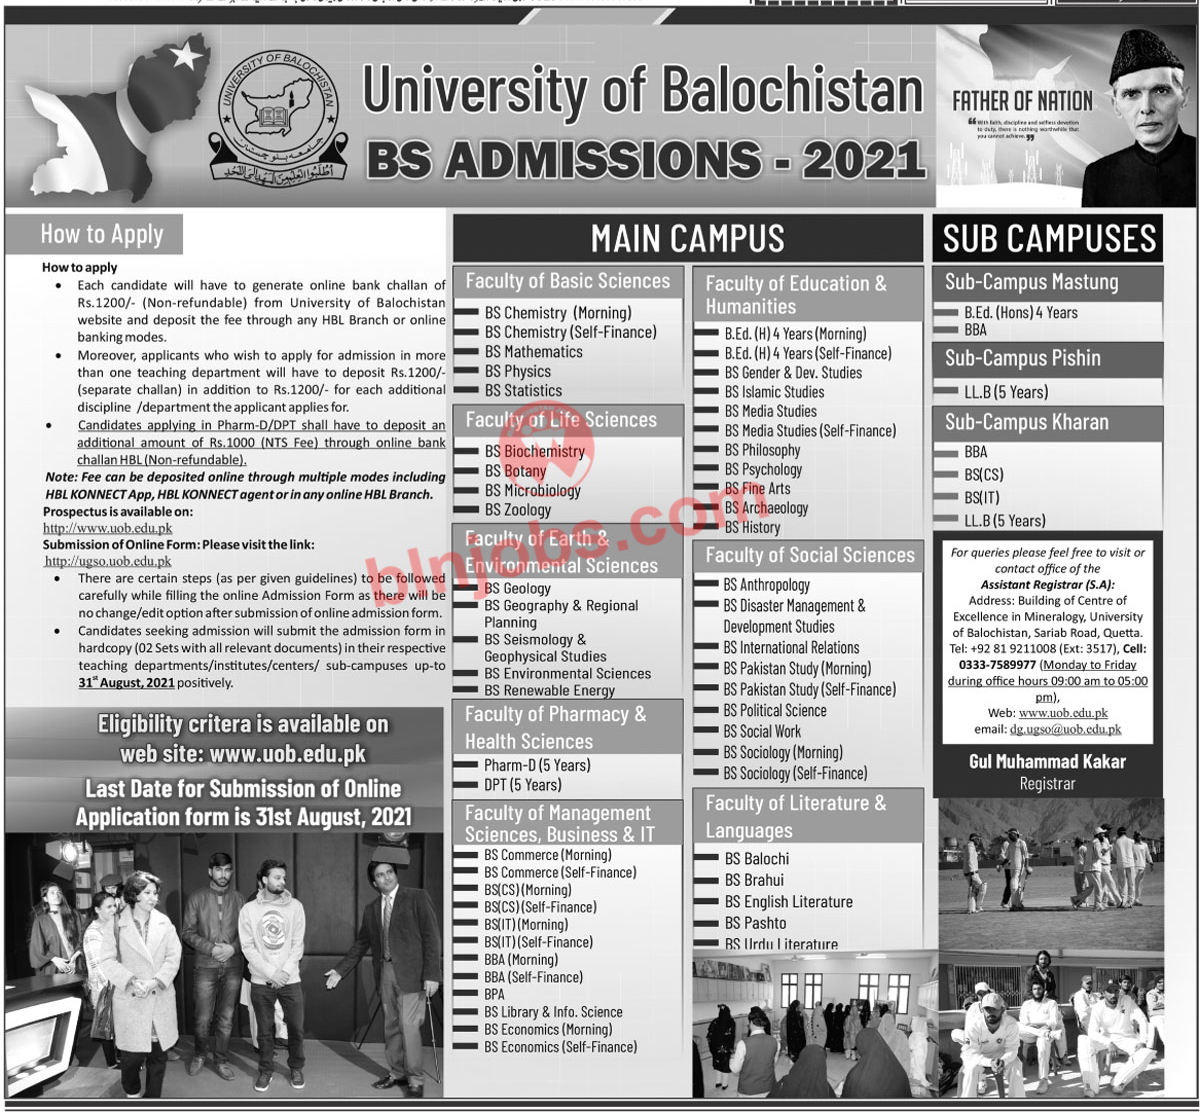 University of Balochistan BS Admissions 2021